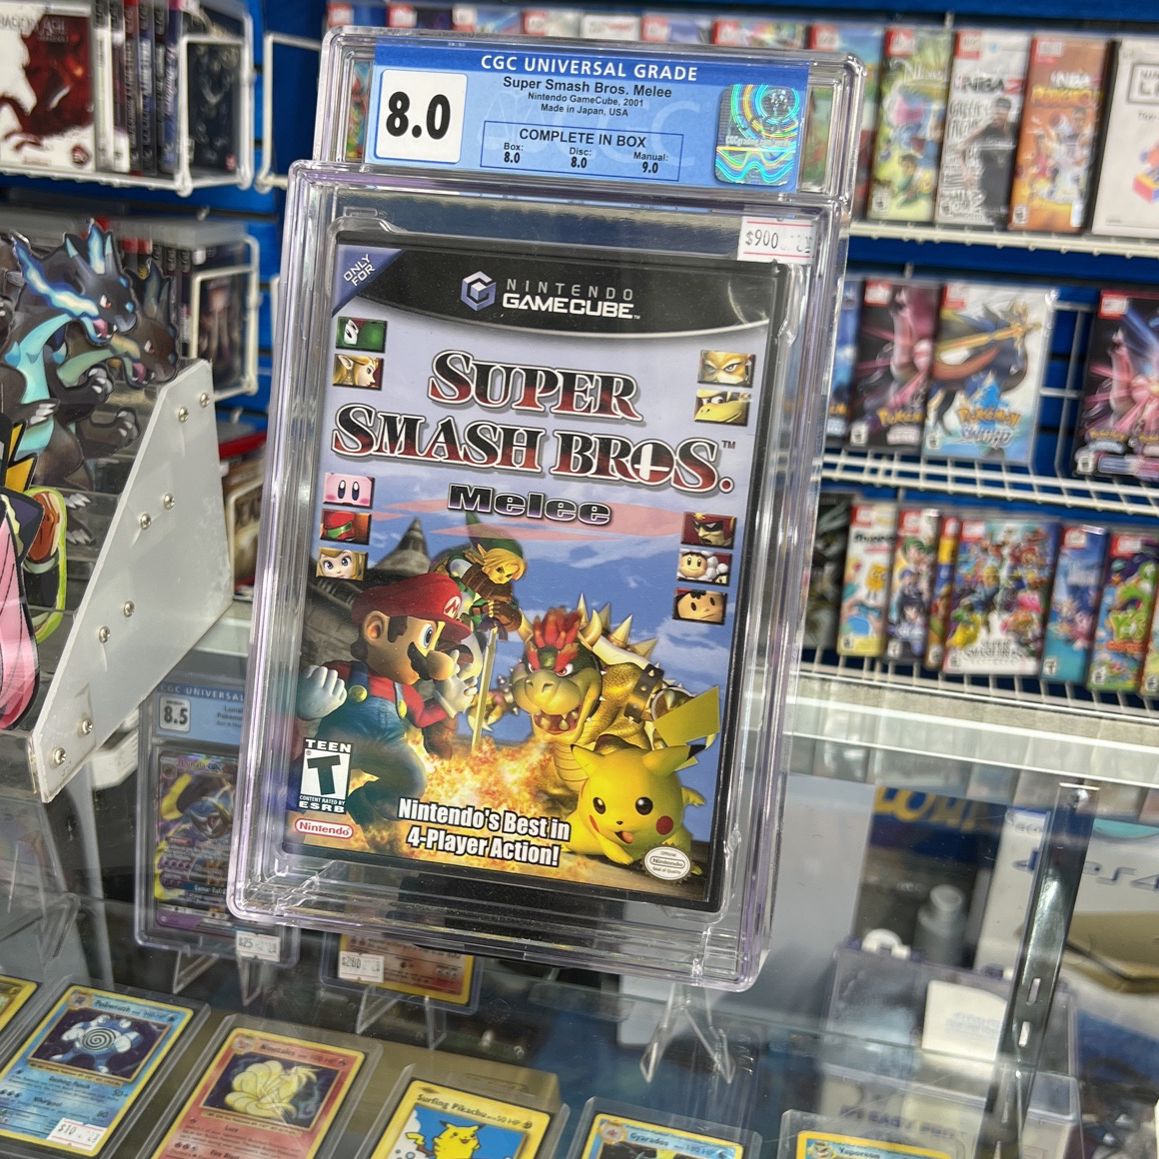 Super Smash Bros Melee - CGC Graded *TRADE IN YOUR OLD GAMES FOR CREDIT TOWARDS THIS ITEM*